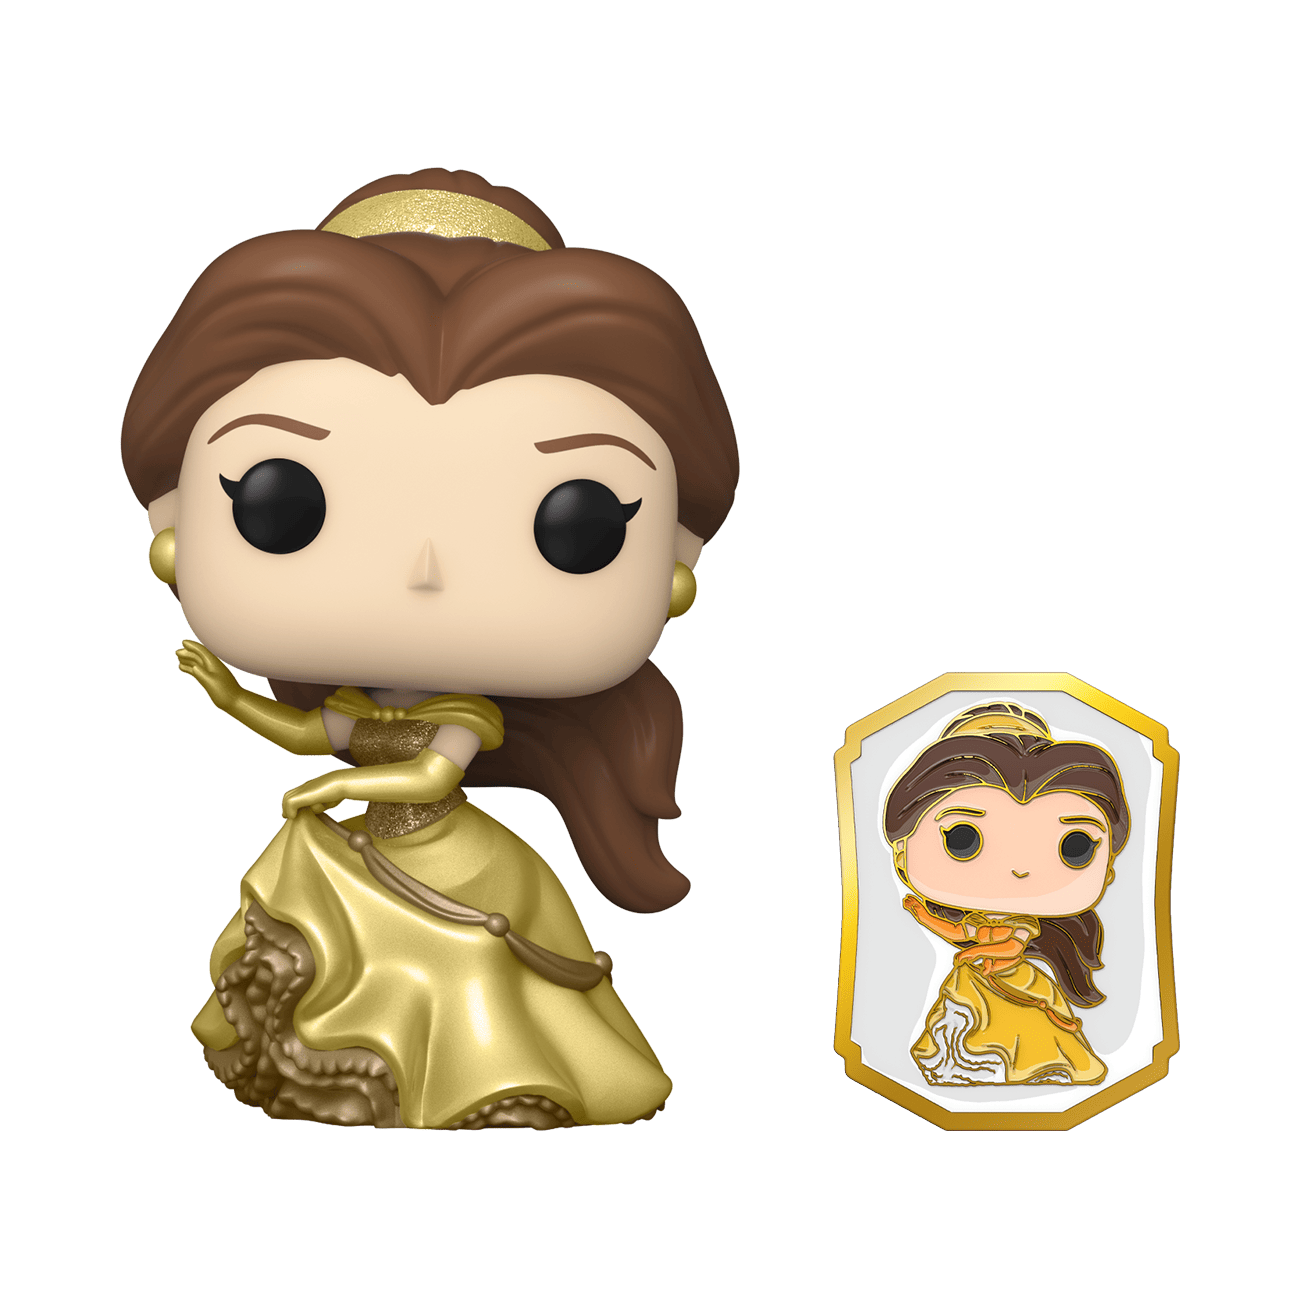 Buy Pop! Belle (Gold) with Pin at Funko.